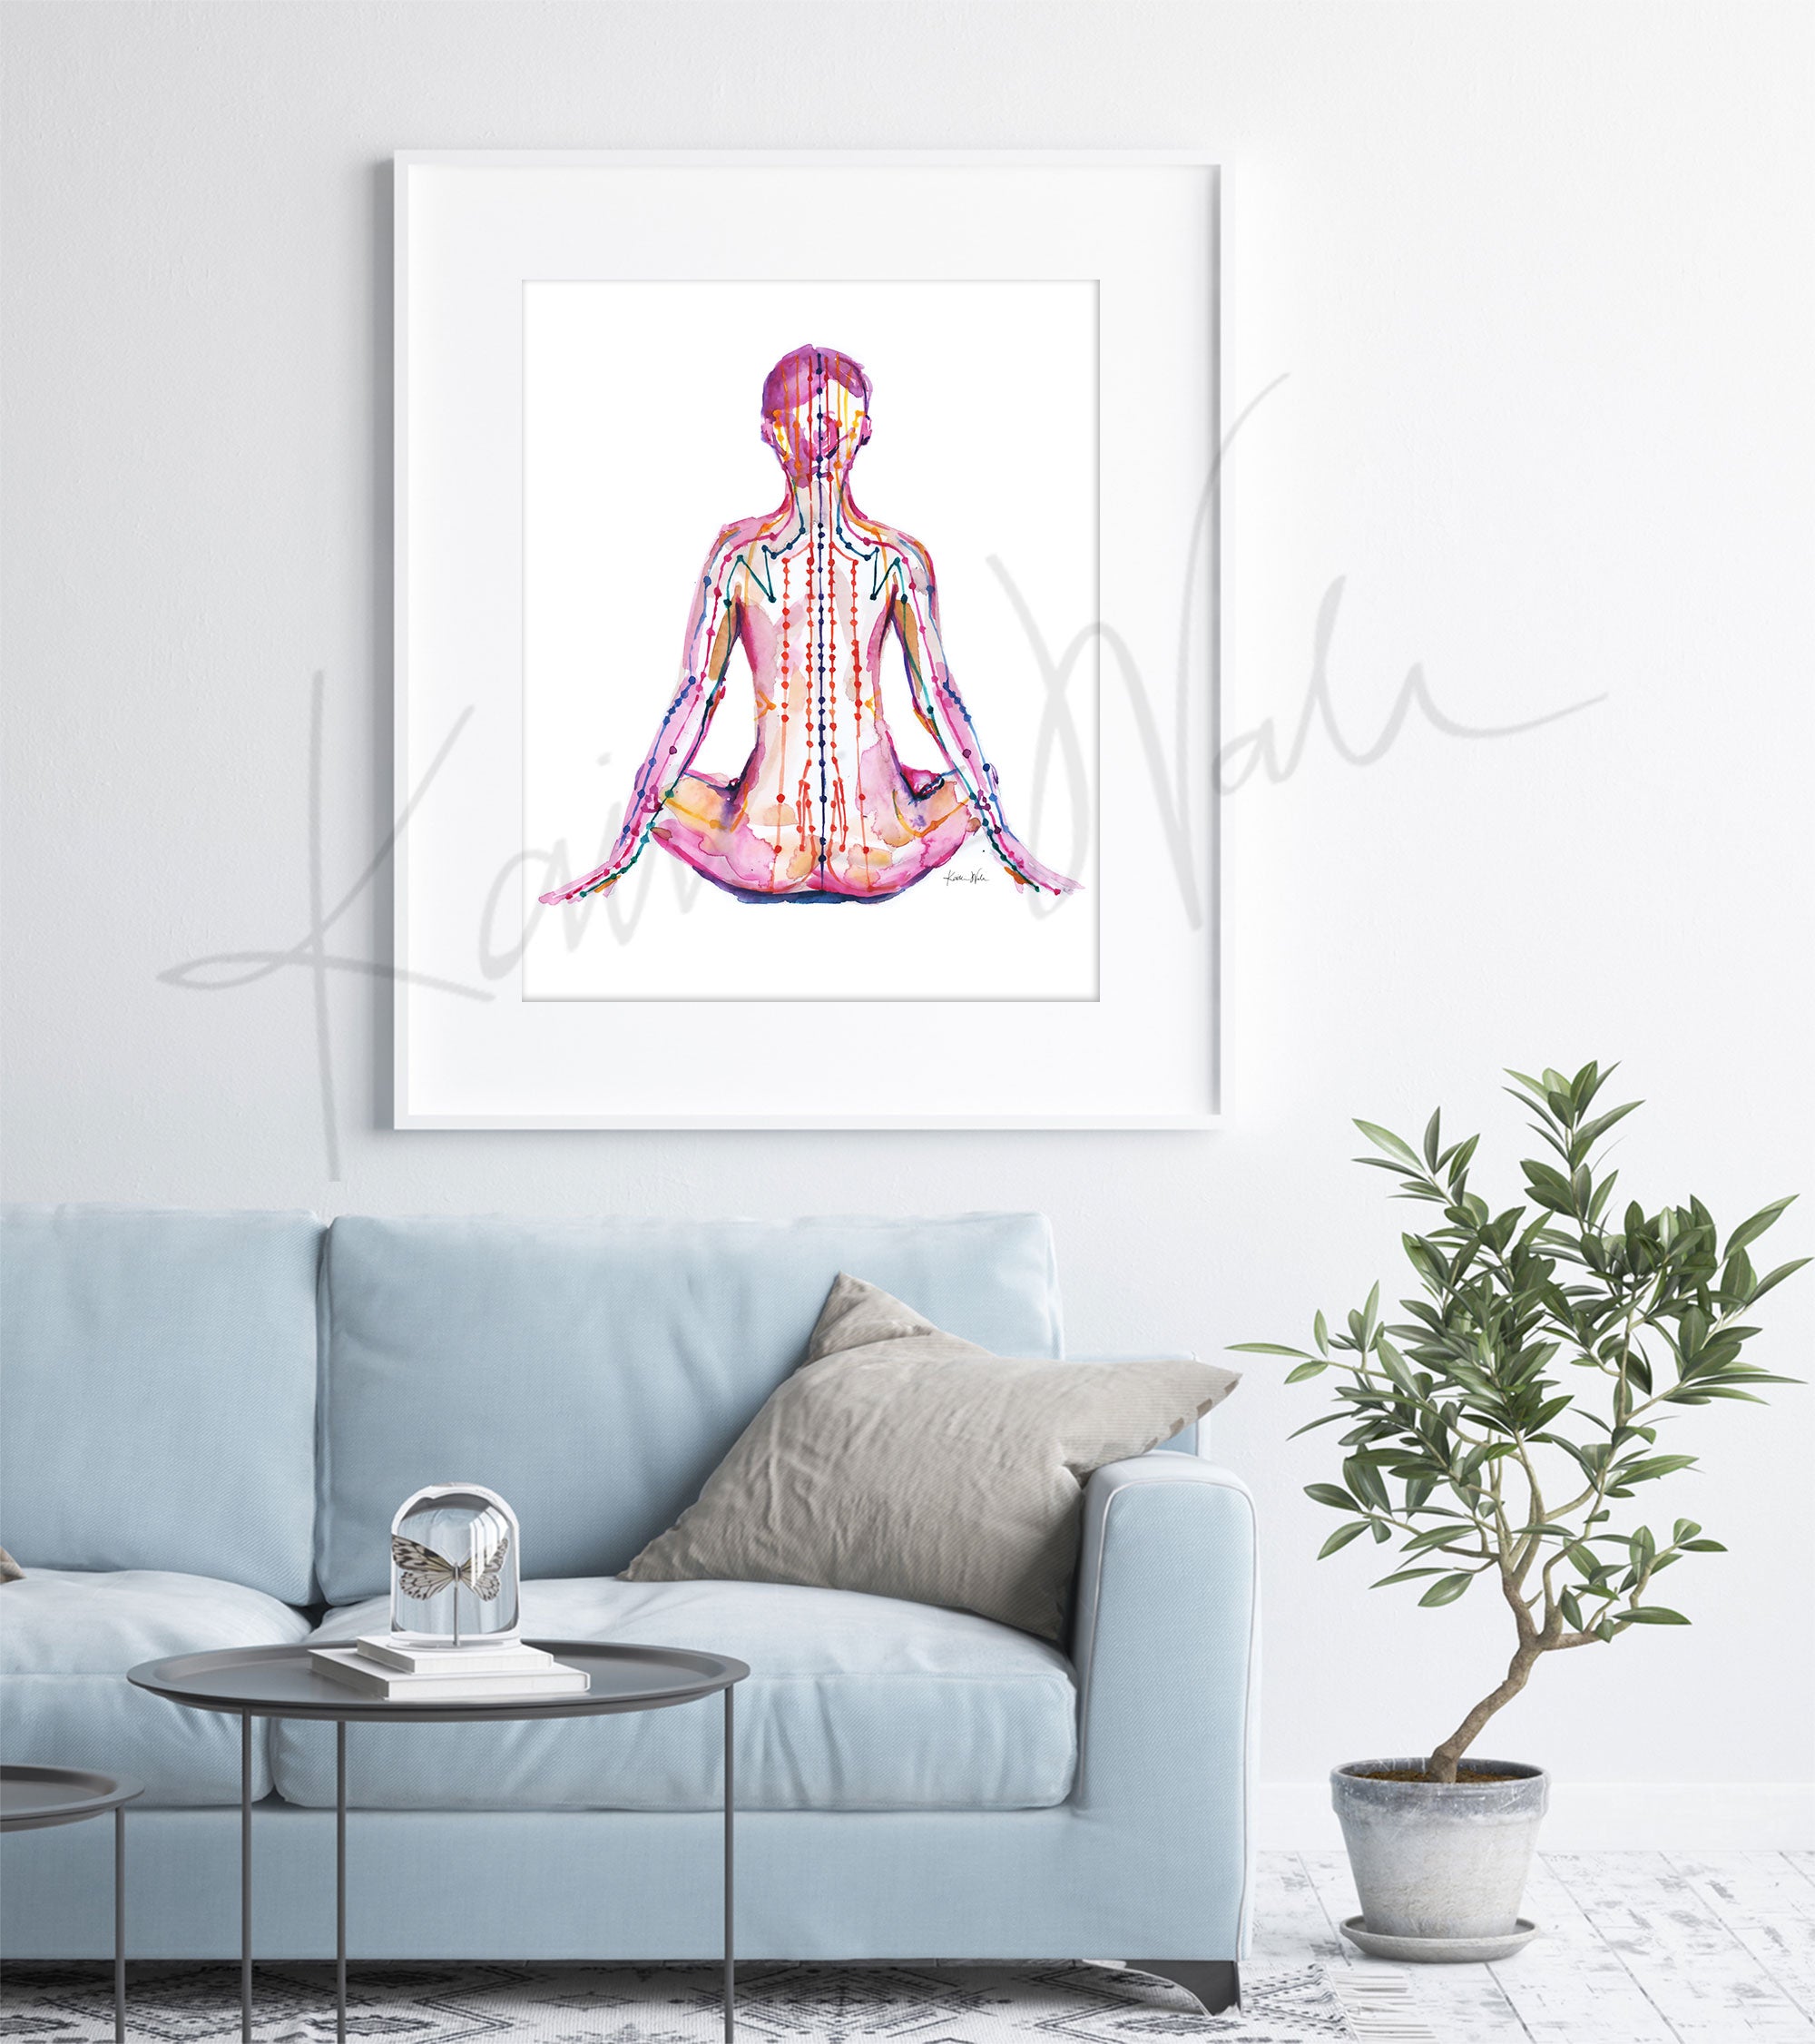 Framed watercolor painting of a person sitting in a meditative pose with meridian paths showing. The painting is hanging over a blue couch.